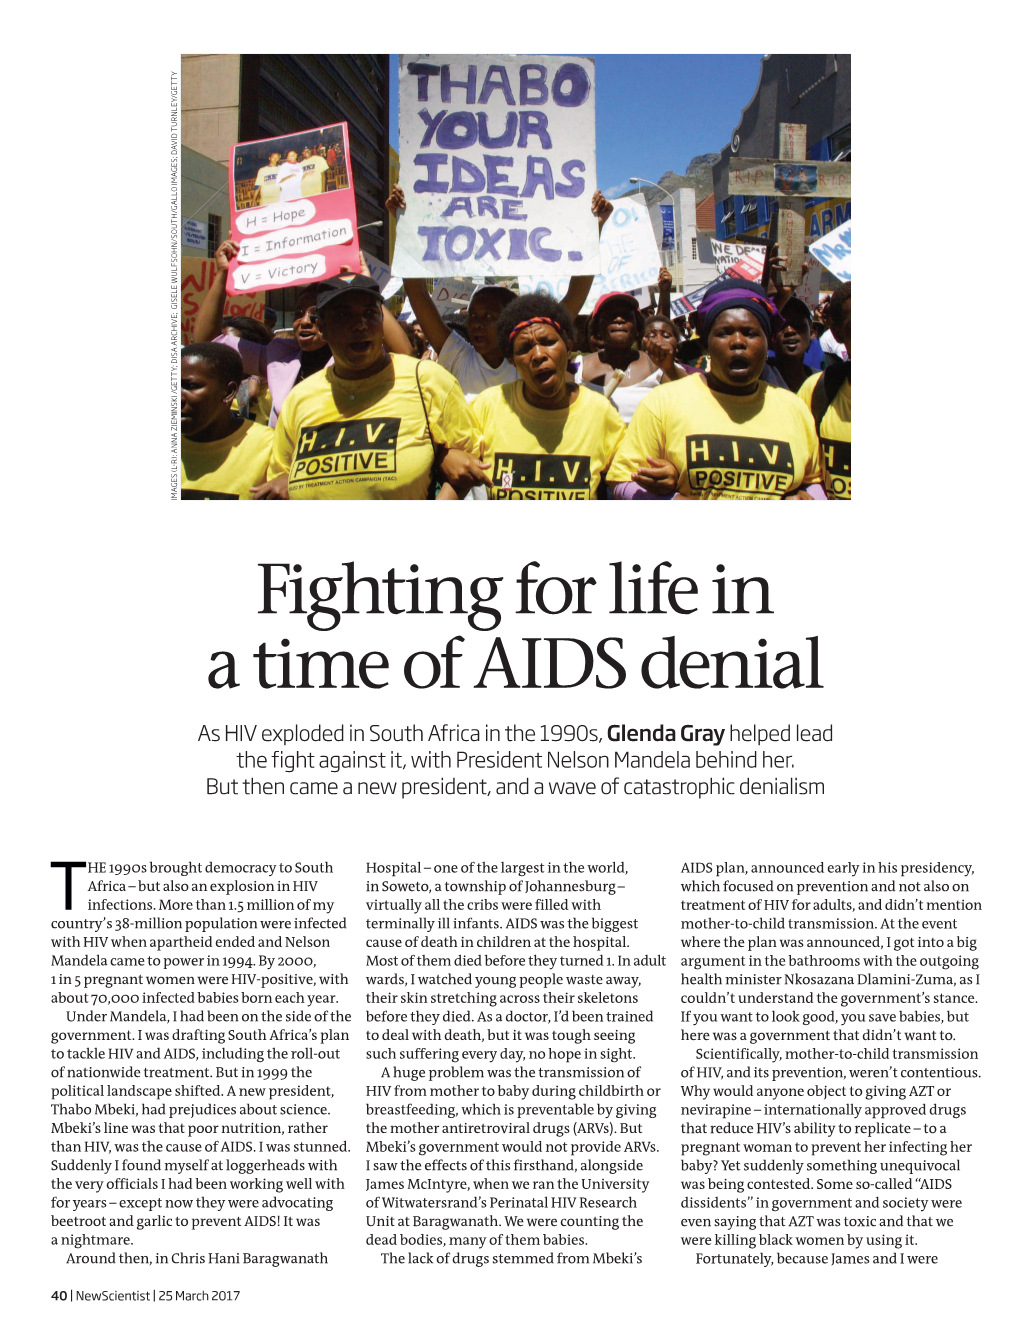 Fighting for Life in a Time of AIDS Denial